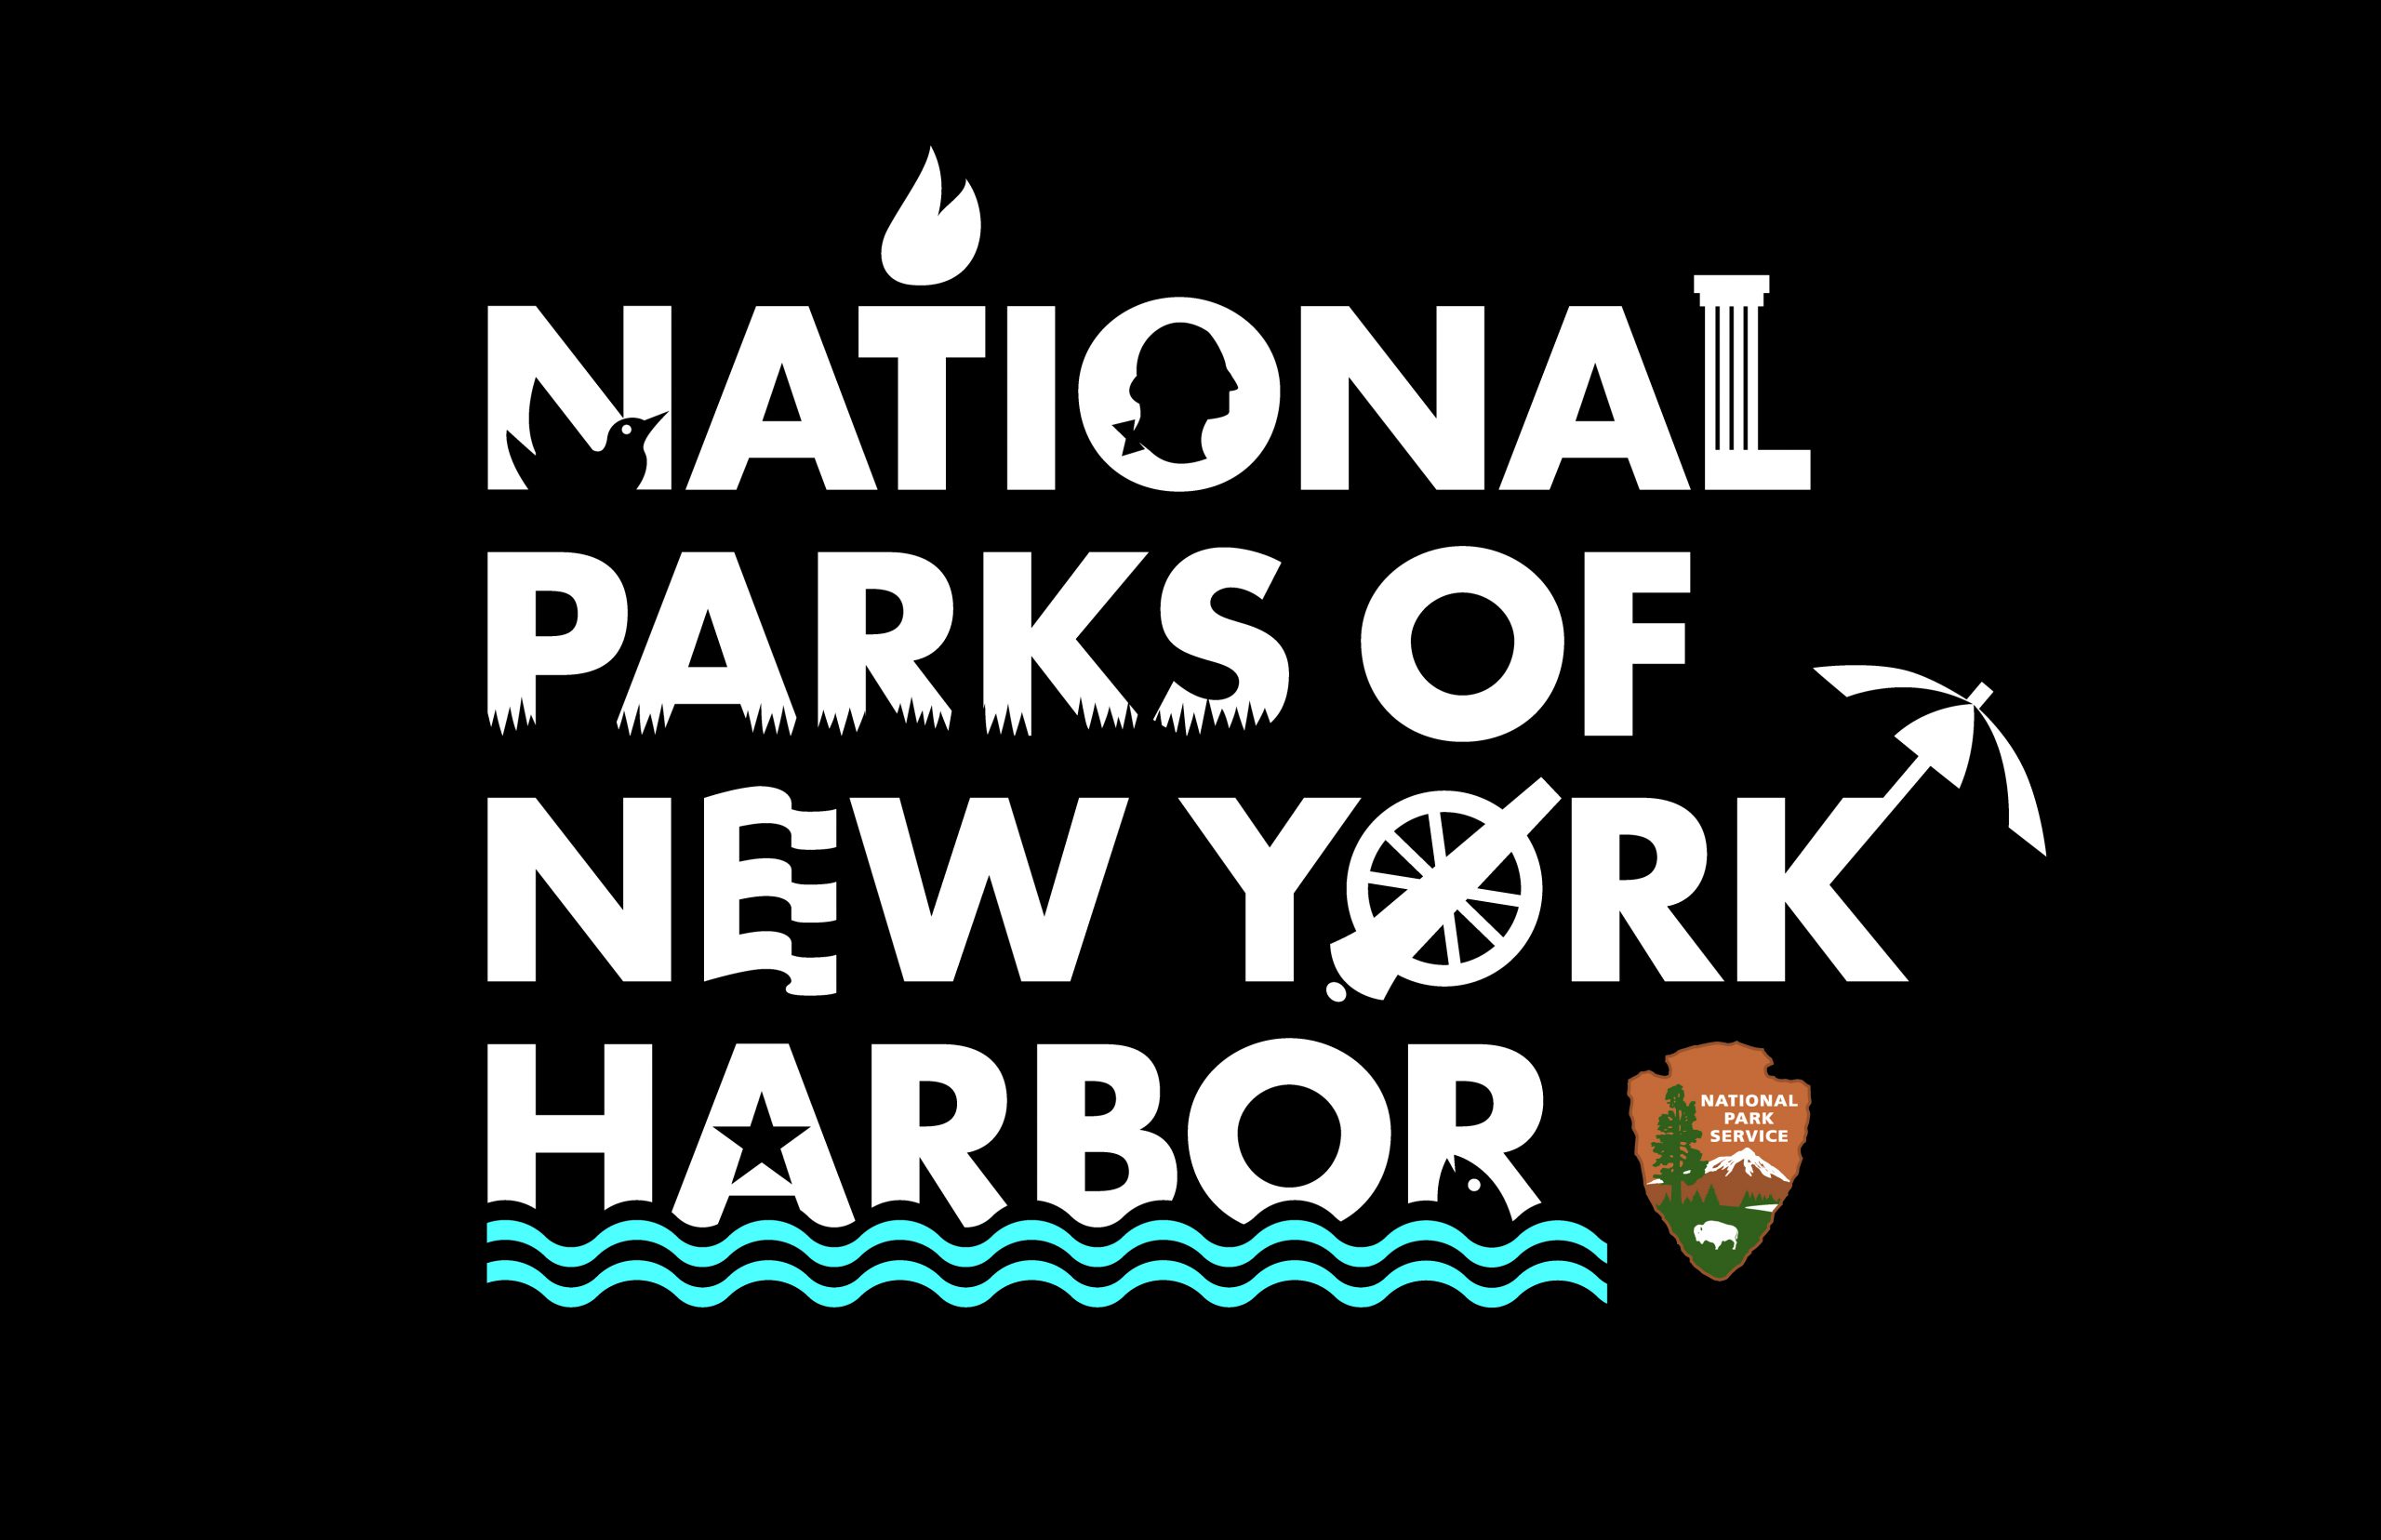 Project image 1 for Identity System, National Parks of New York Harbor